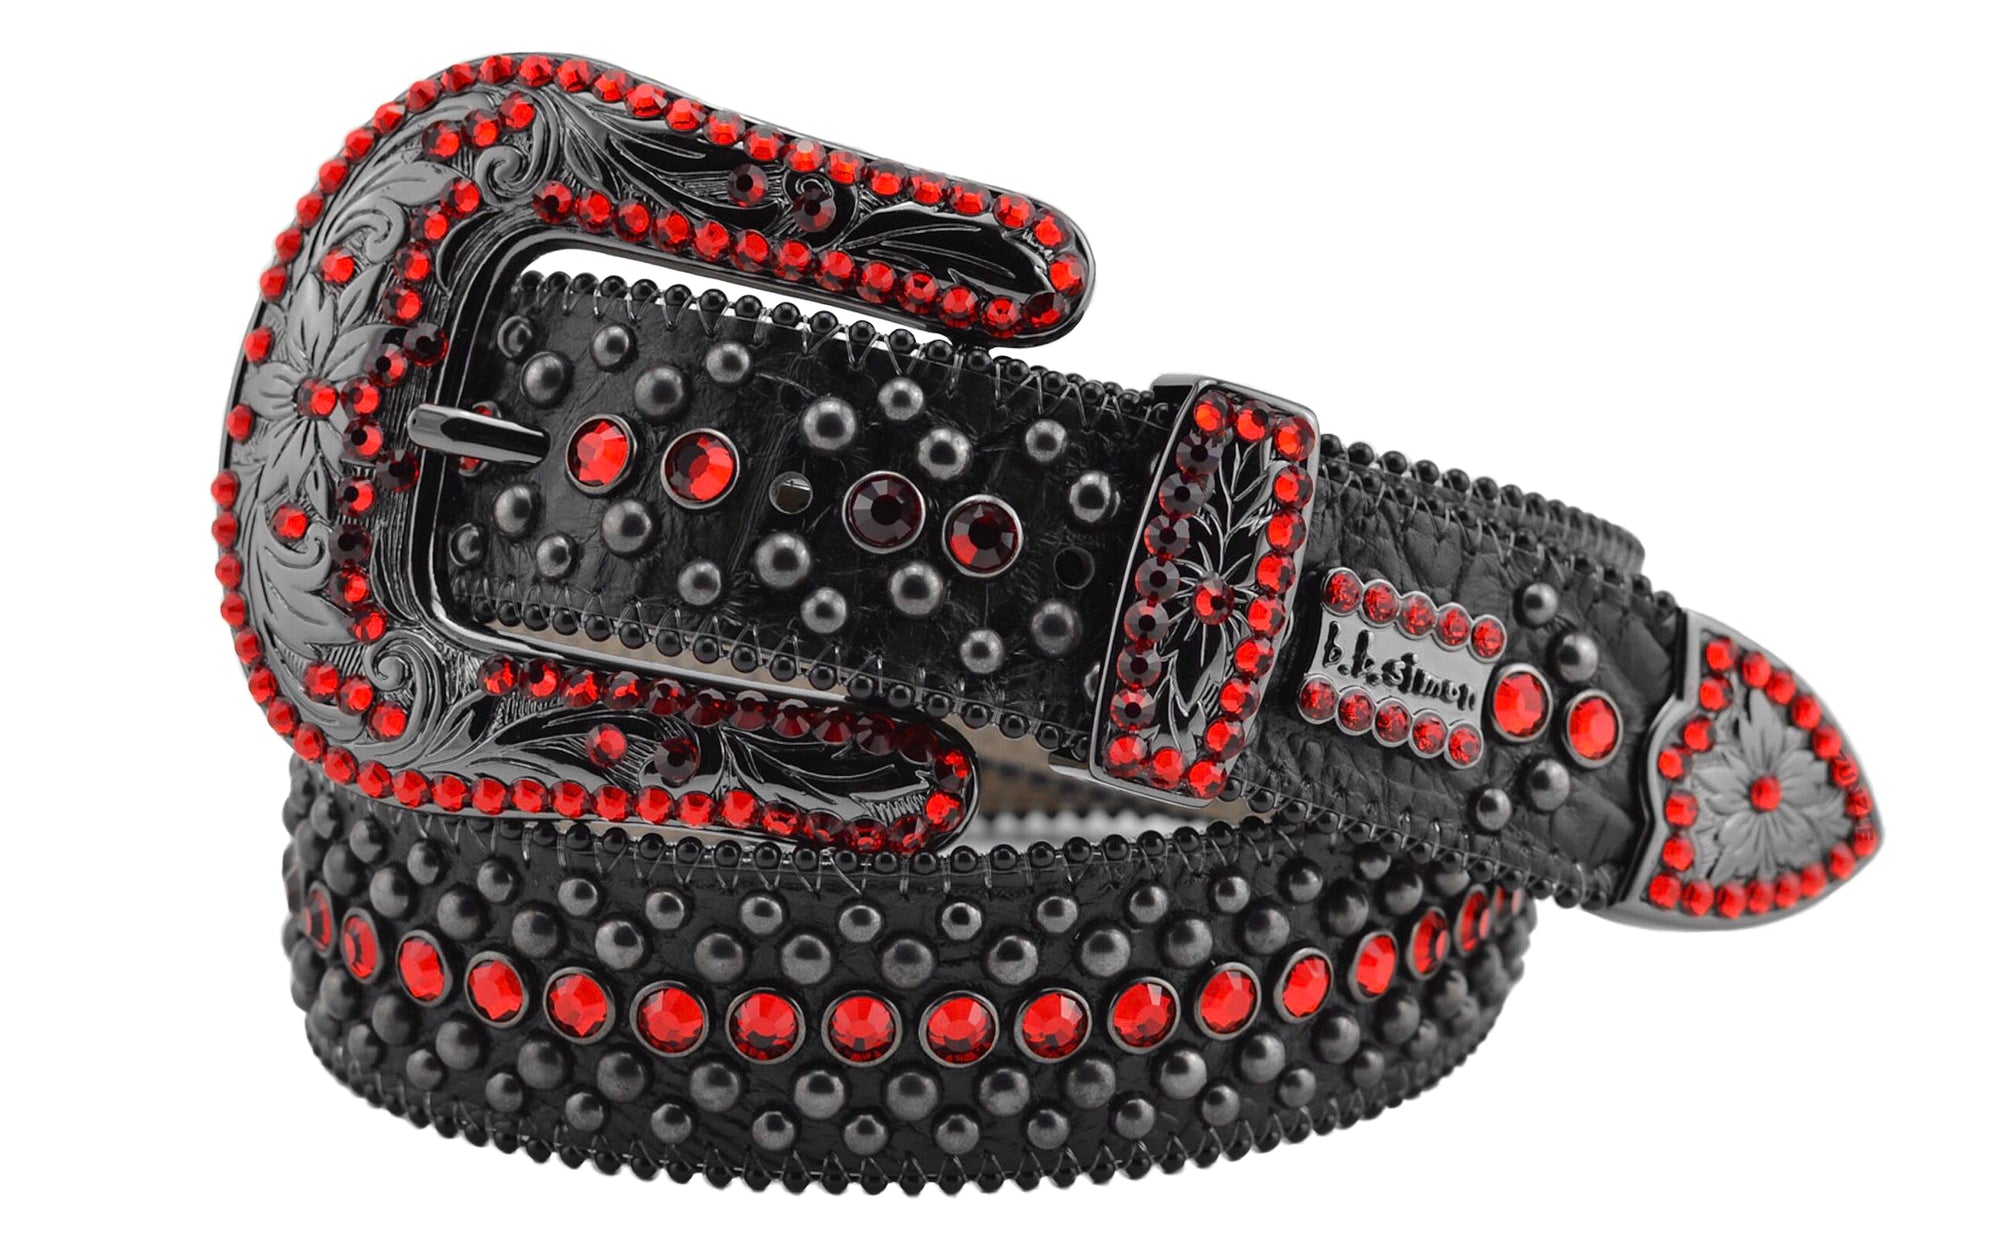 Mens b.b. simon black veronica belt with red light siam crystals and black finish